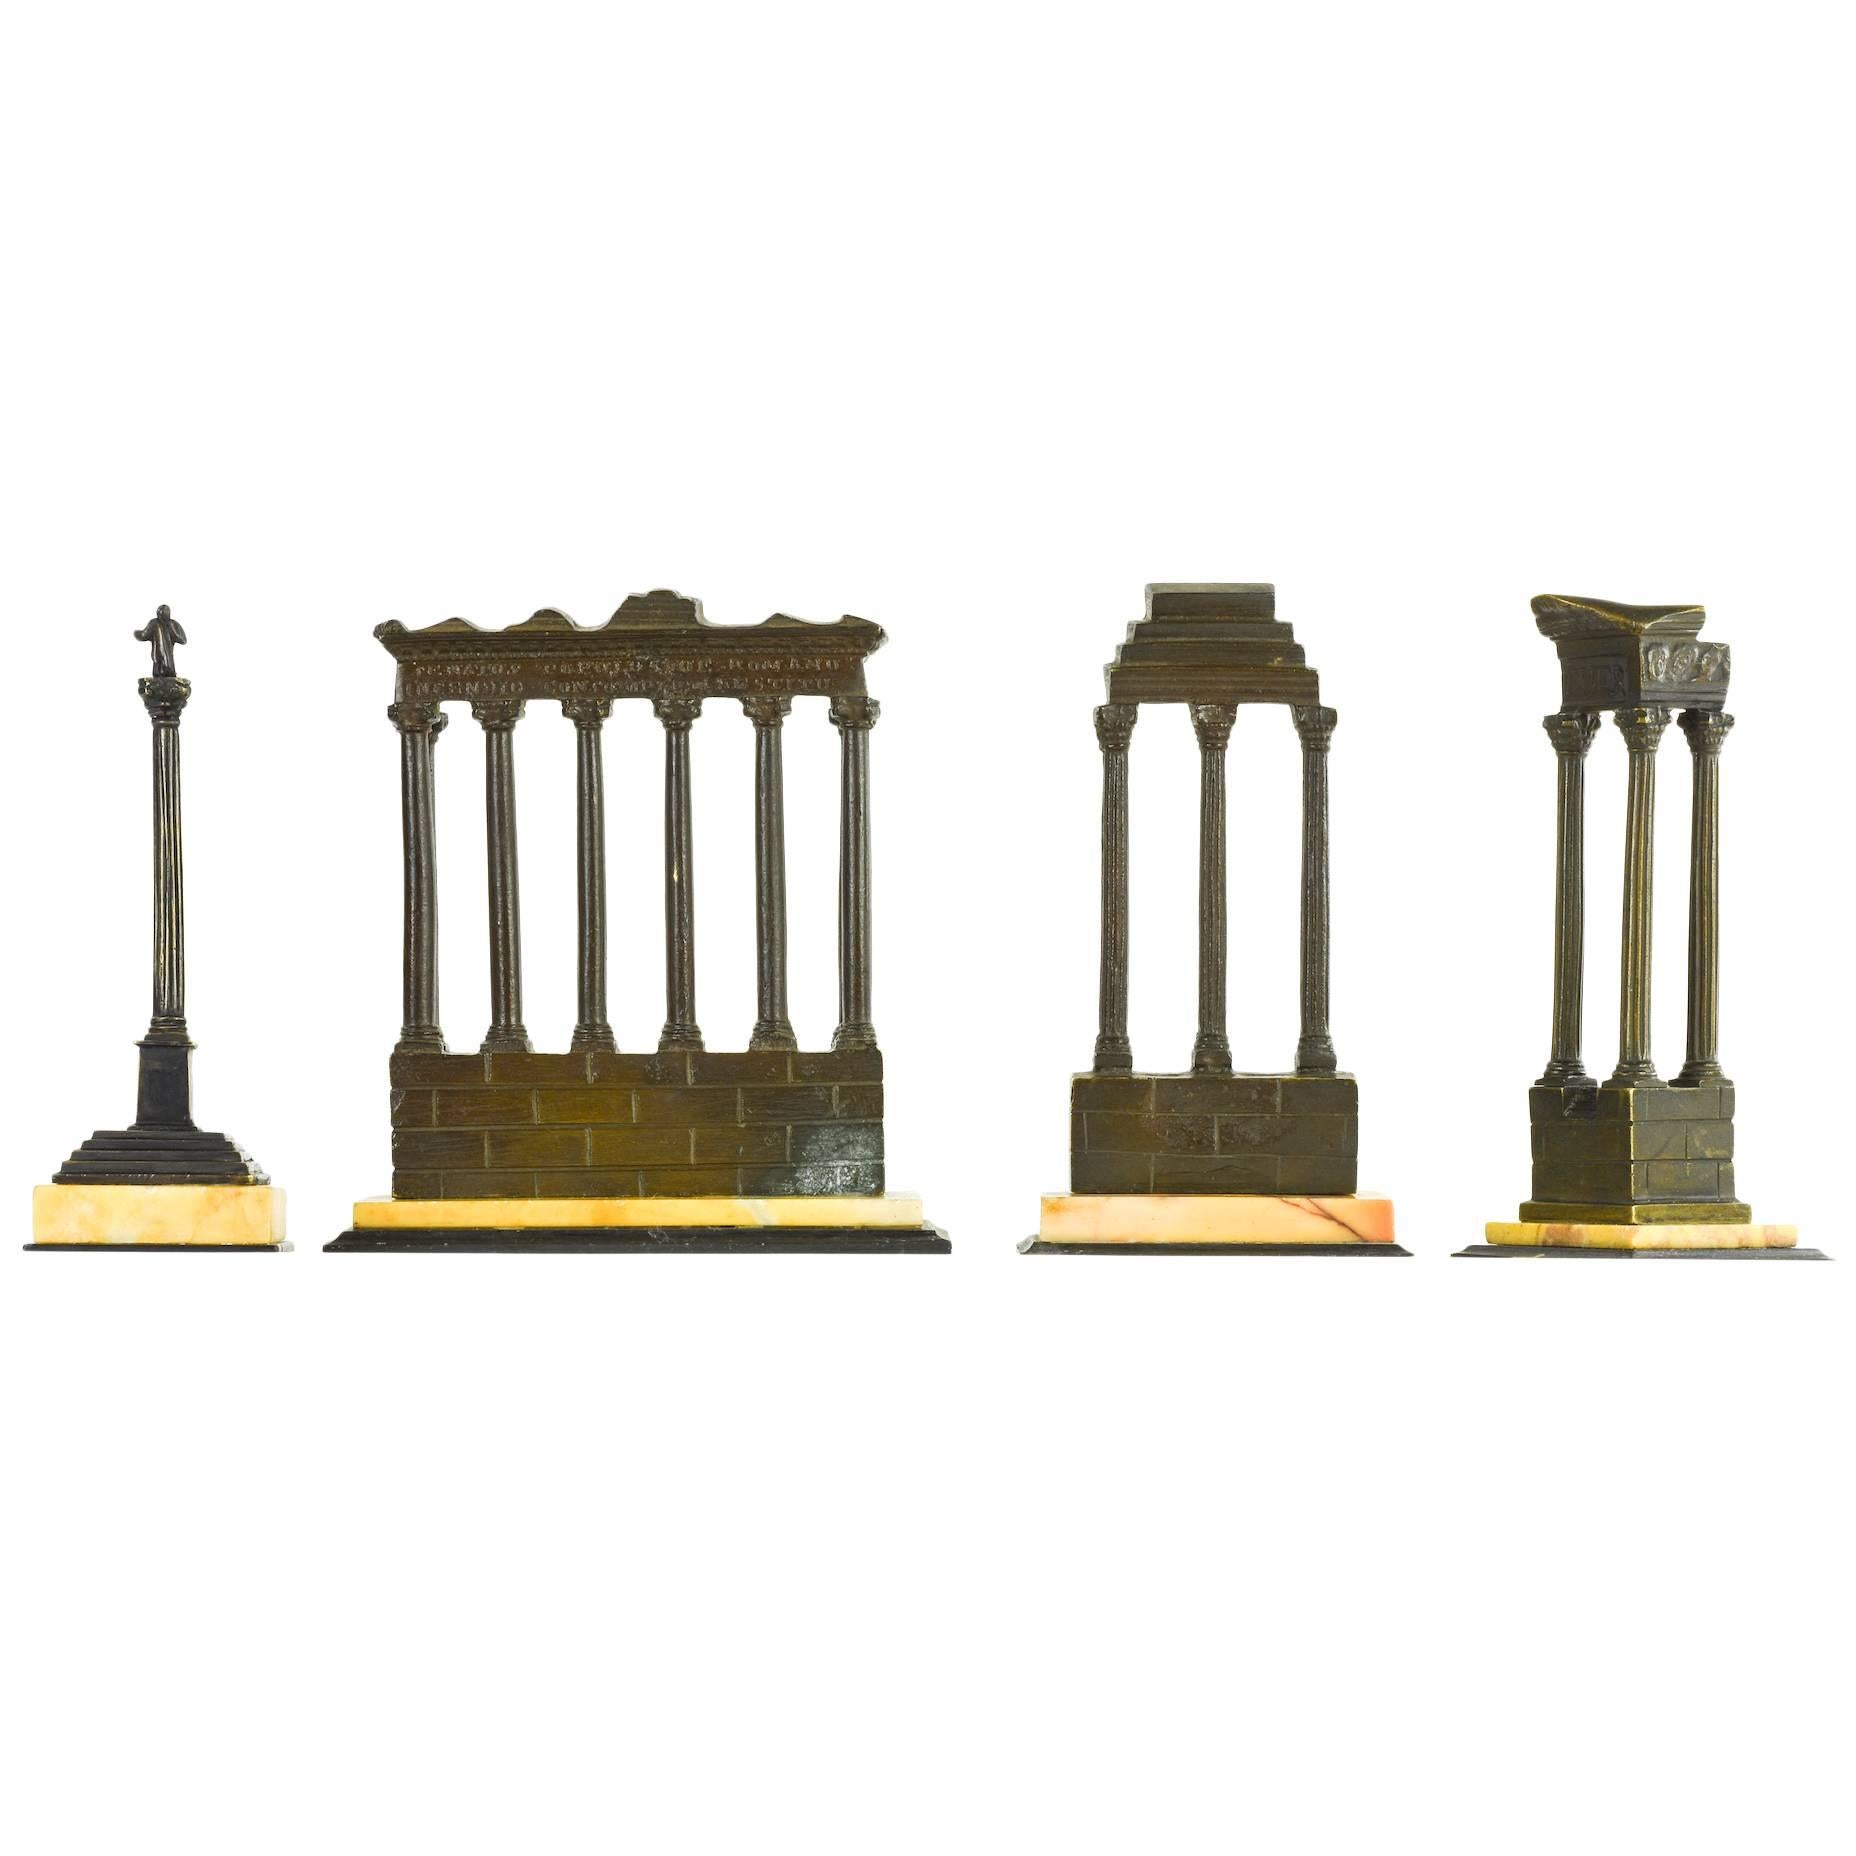 A set of four, later 19th century, bronze and marble models of the Roman Forum.
Dark patinated bronze with Giallo and Nero marble bases,
Rome, 5” H, circa 1880.

An unusual, intact set of Grand Tour souvenirs of ruined temples and a monument in